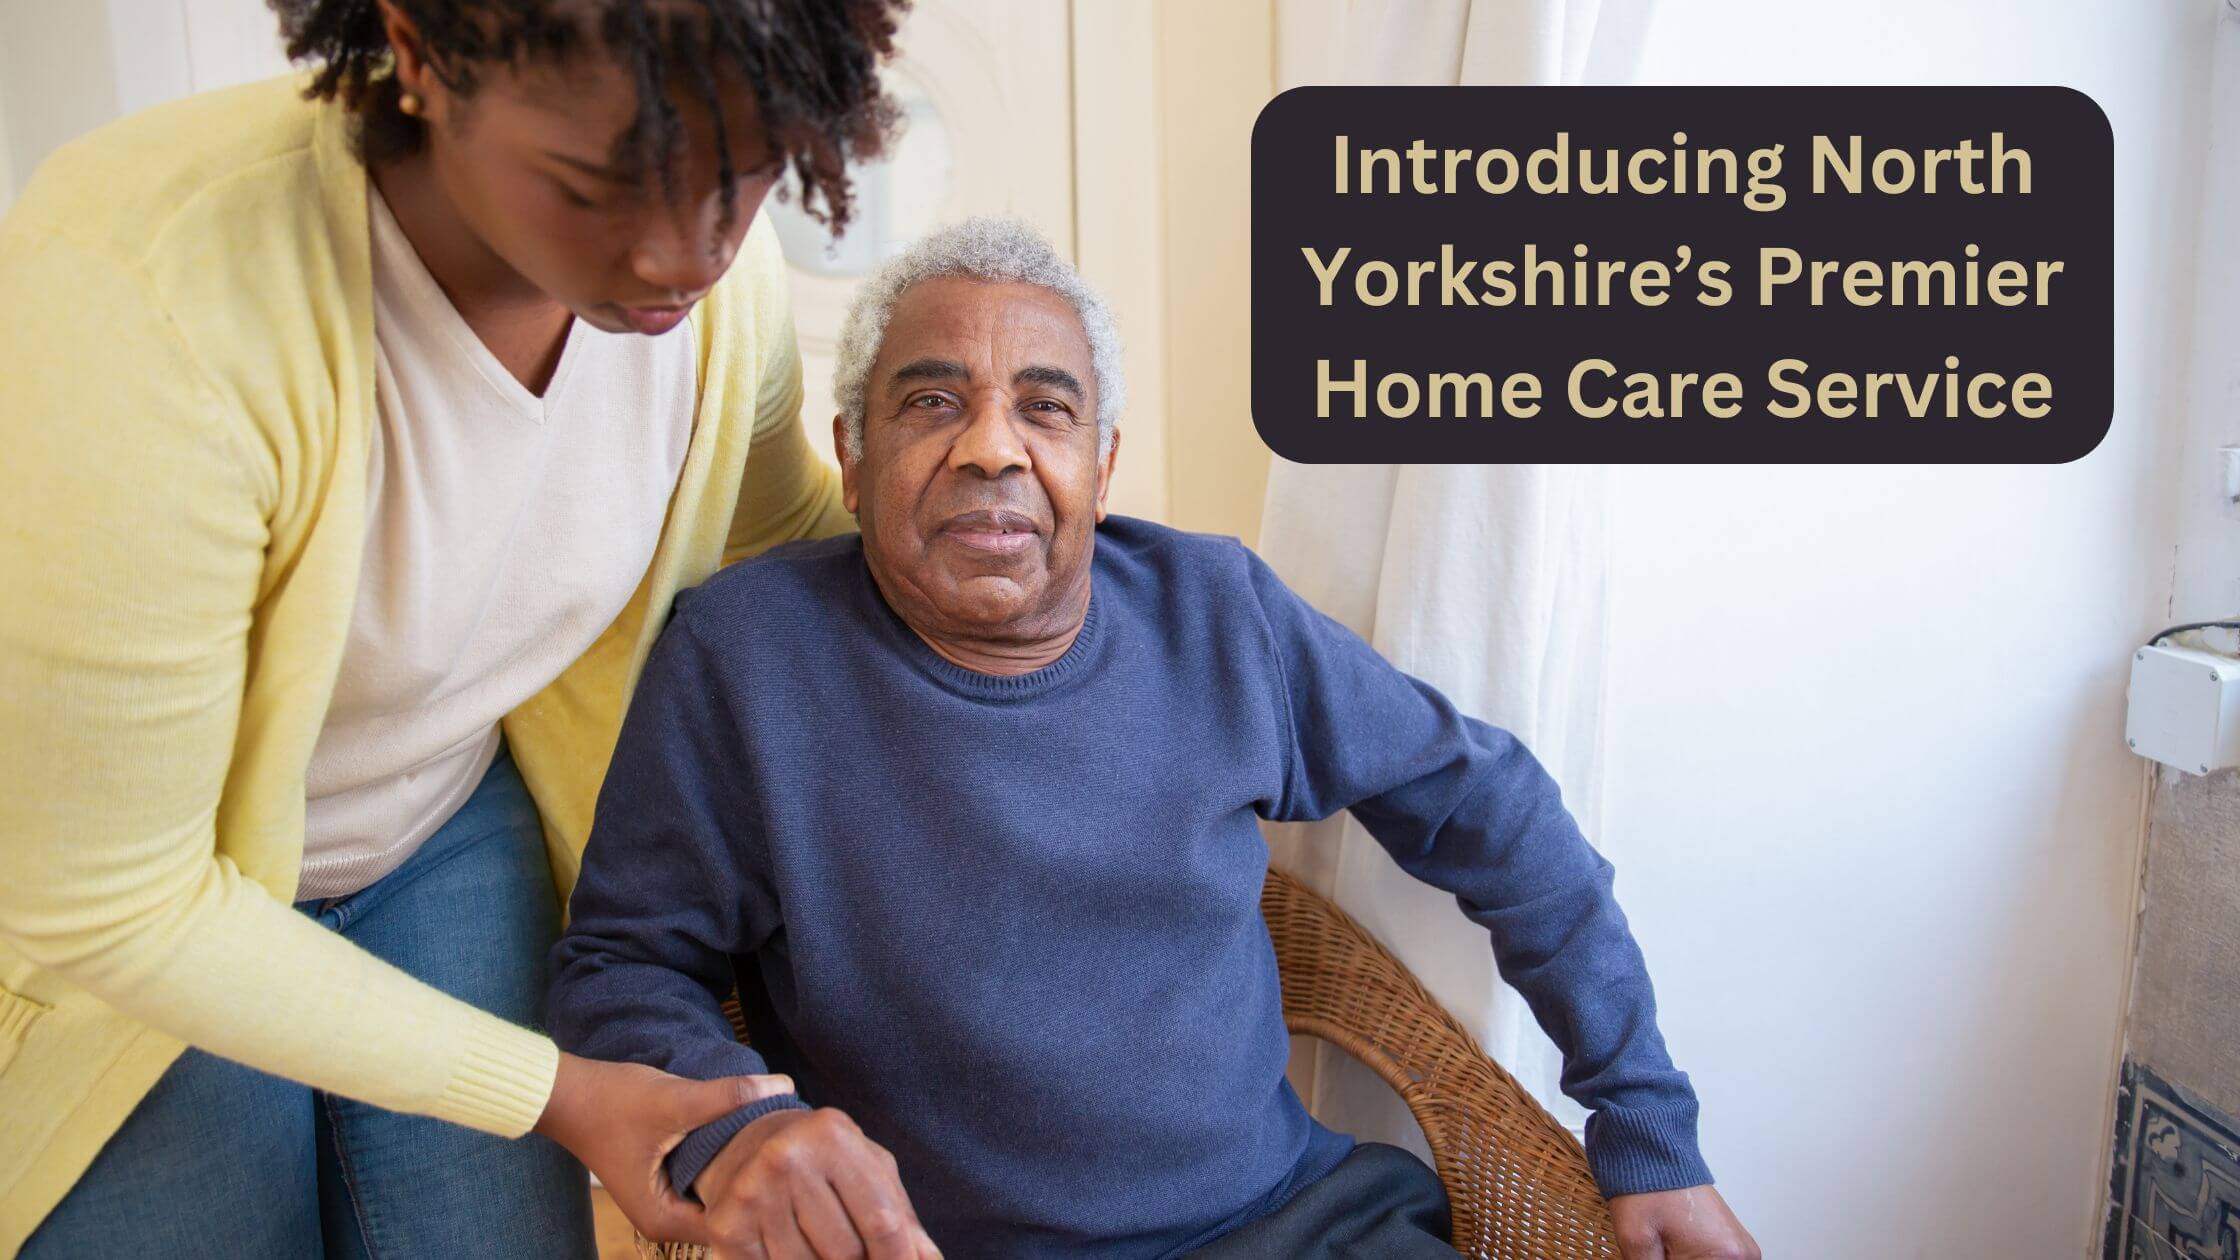 Introducing North Yorkshire’s Premier Home Care Service